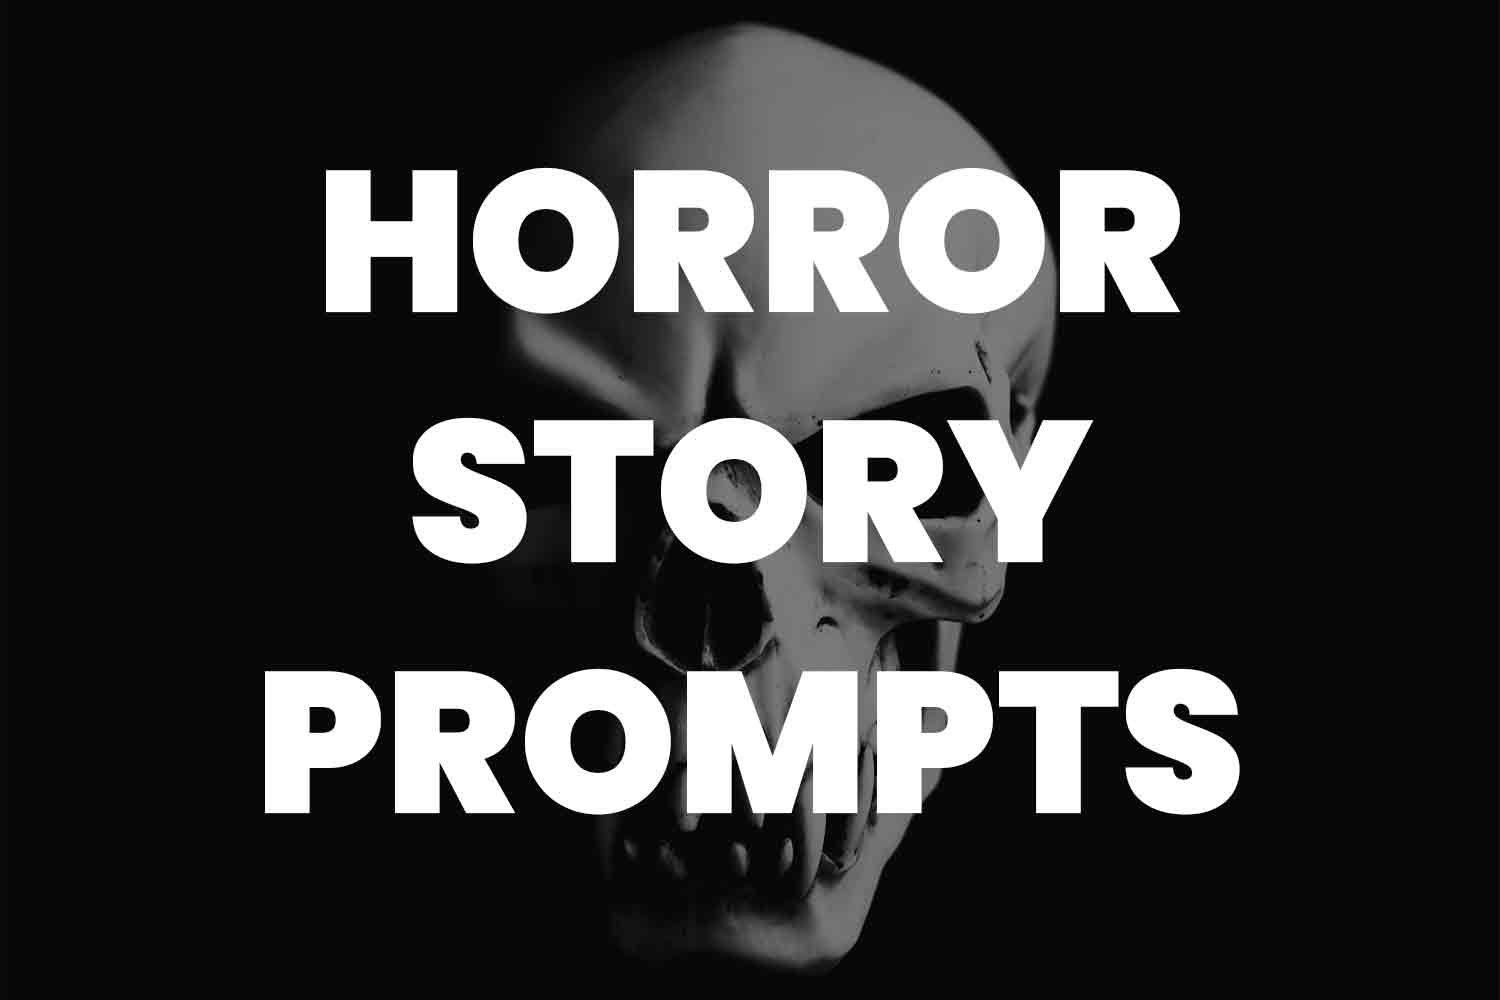 101+ Spine-Tingling Horror Writing Prompts for Creating Truly Terrifying  Tales